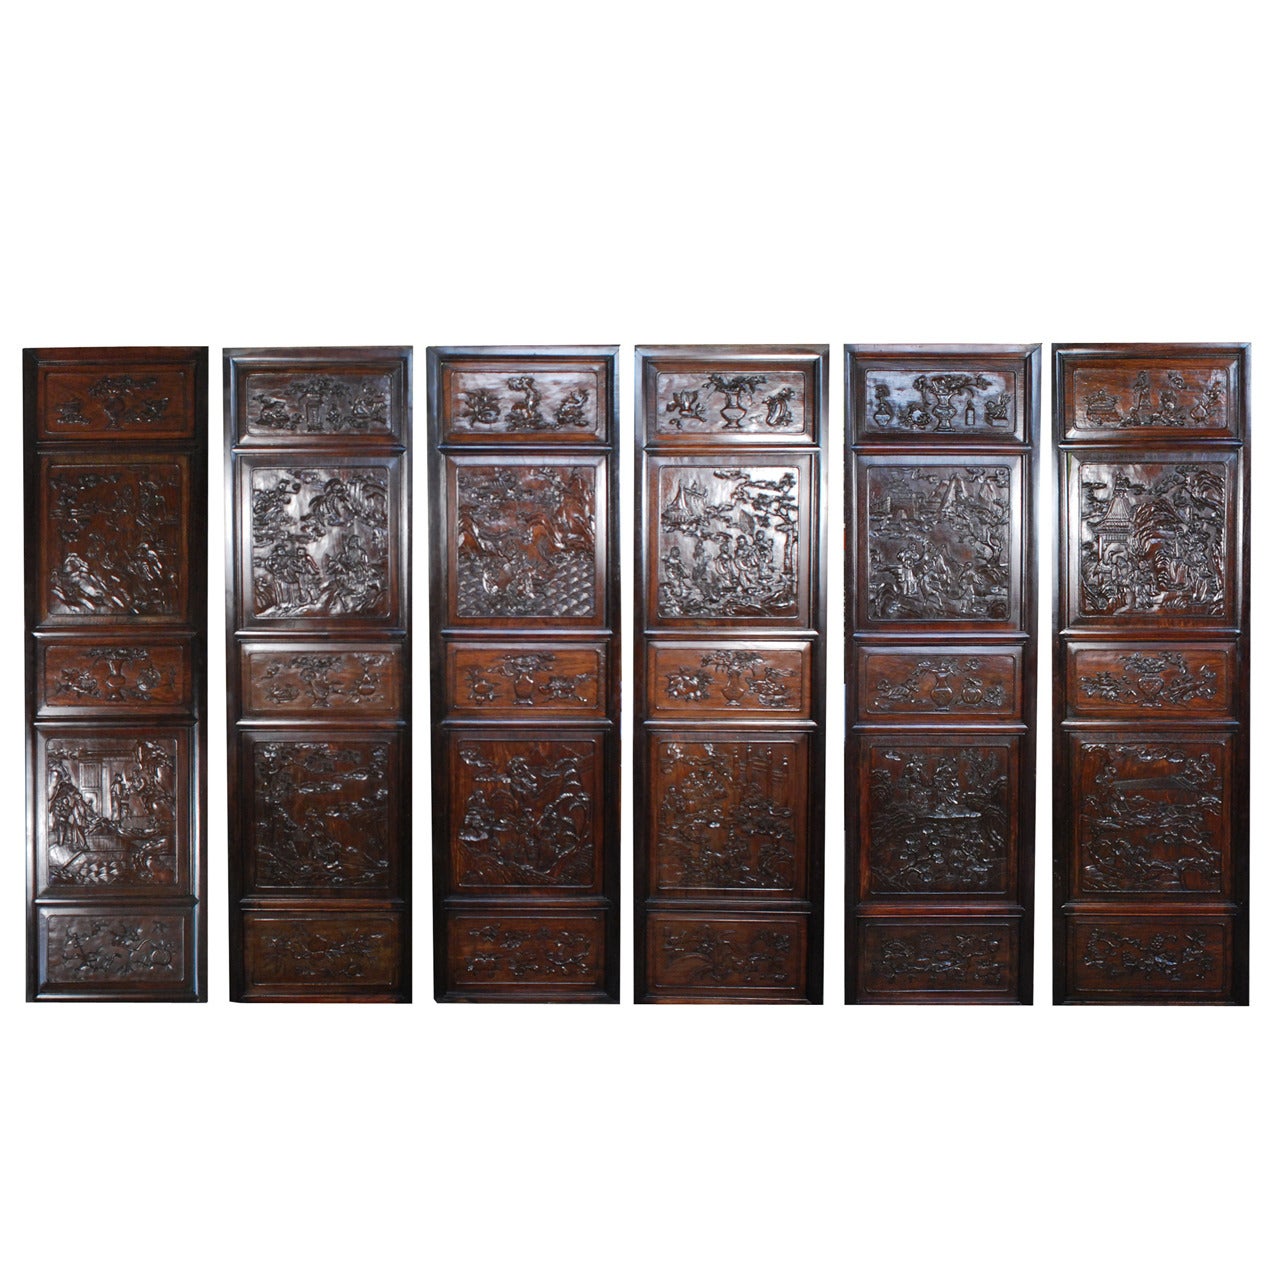 Set of Six 19th Century Rosewood Carved Panels